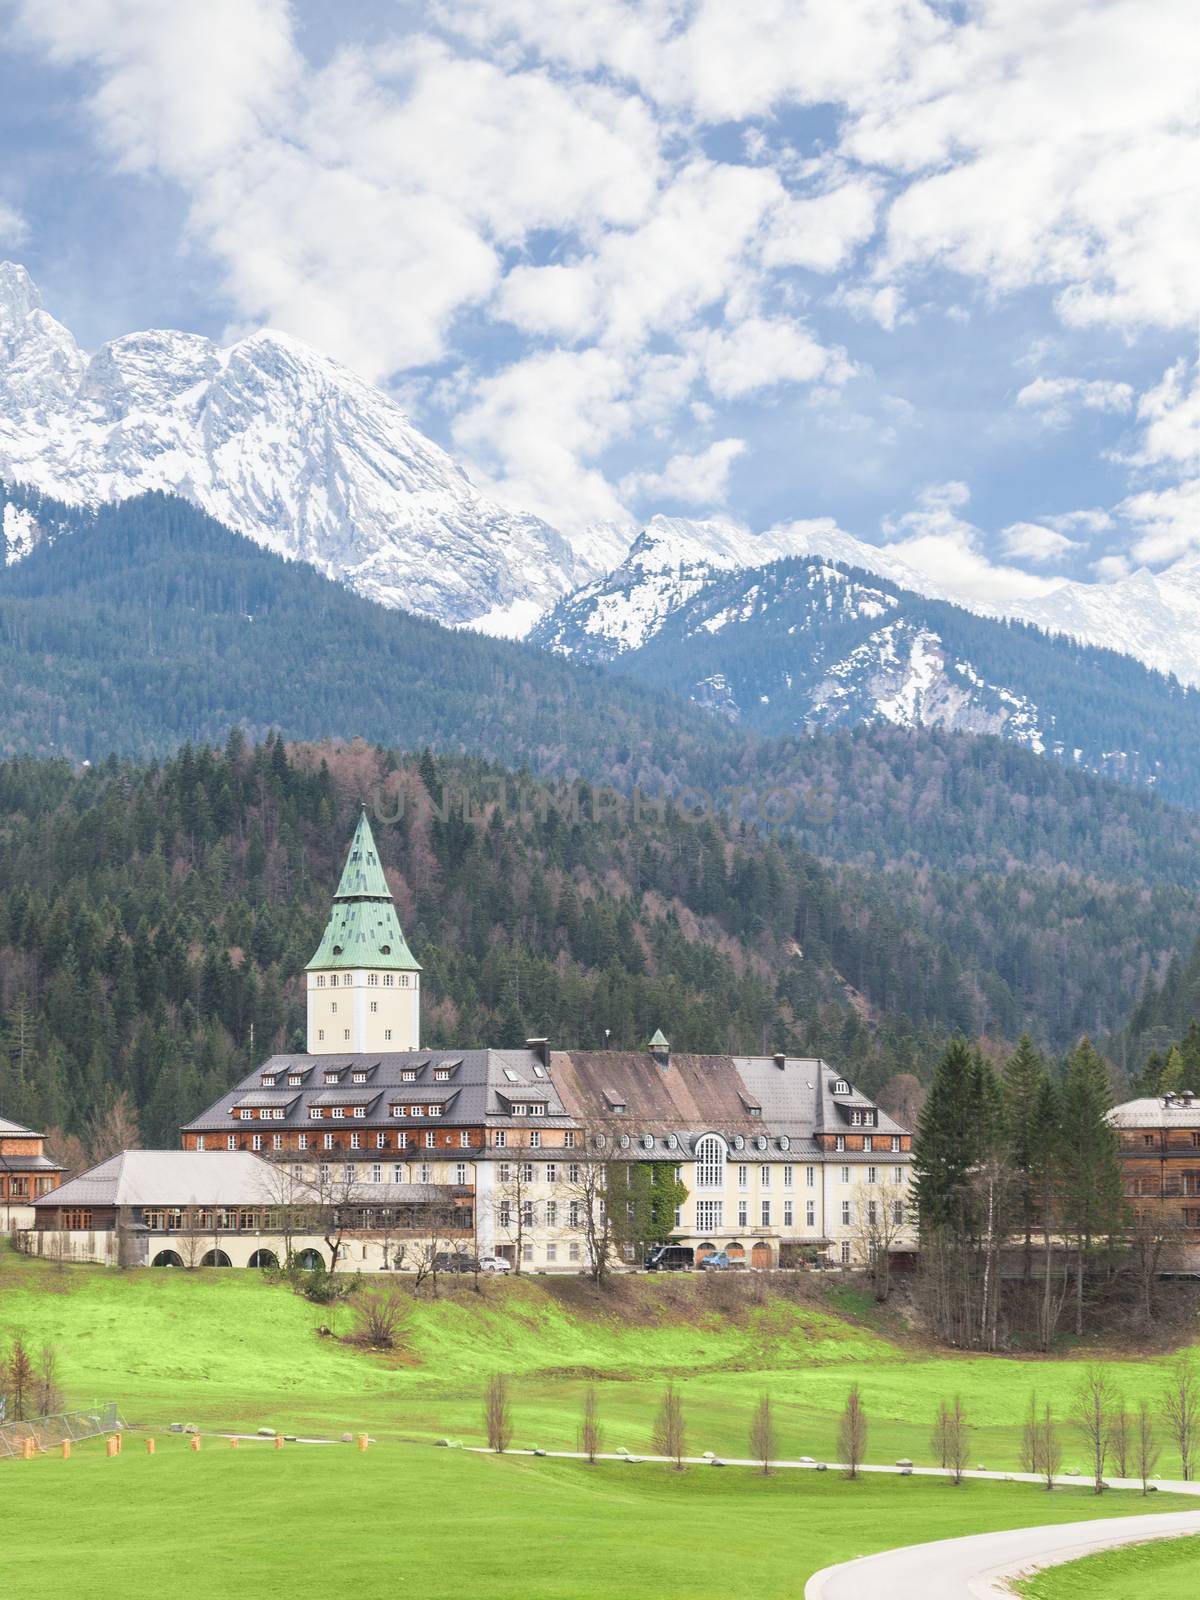 Klais, Germany - April 26, 2015: Hotel Schloss Elmau palace in Bavarian Alps will be the site of the 41st international forum G7 summit at June 7-8 2015. Vertical landscape with Alpine mountains and valley.